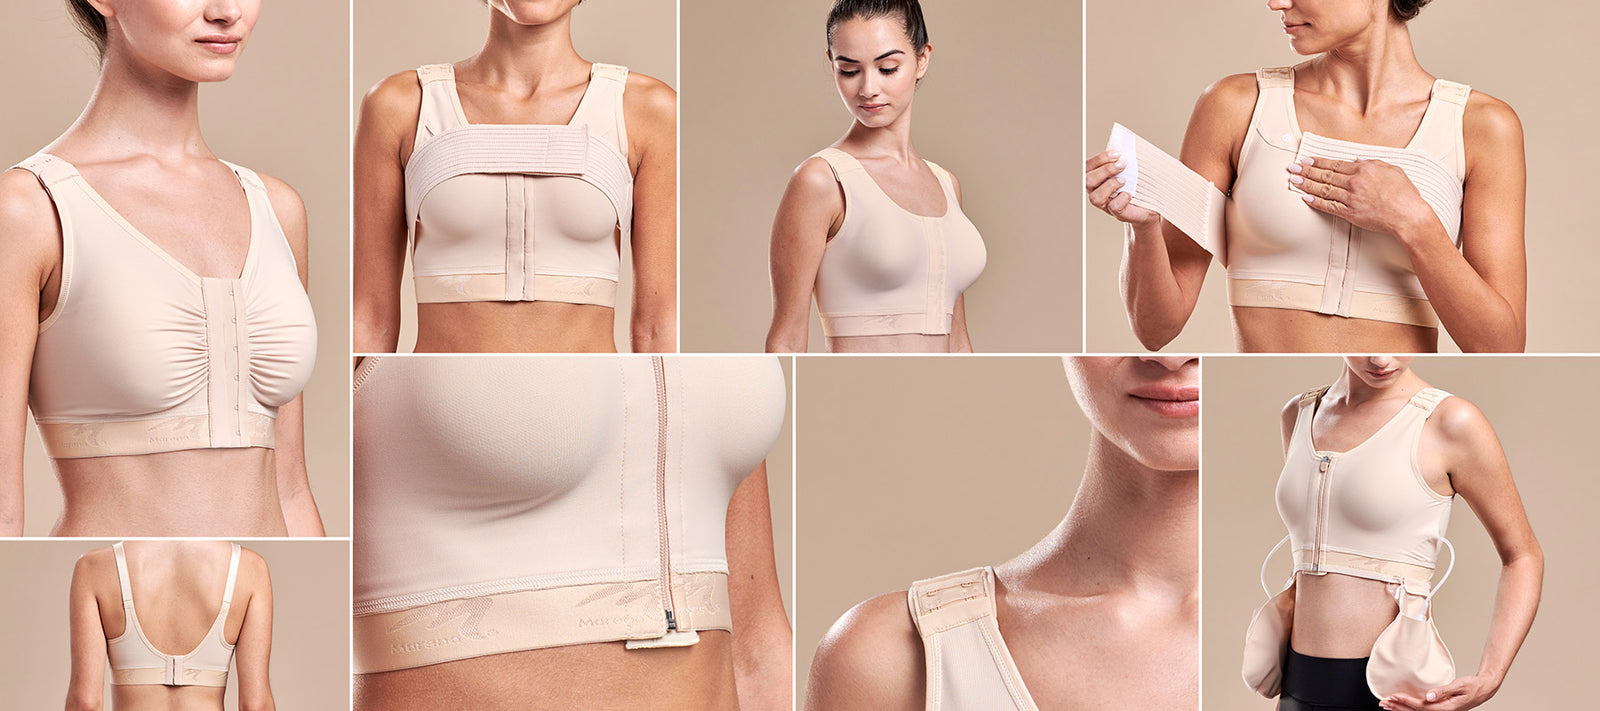 Post Surgical Bra  Surgical Bra After Breast Reduction - The